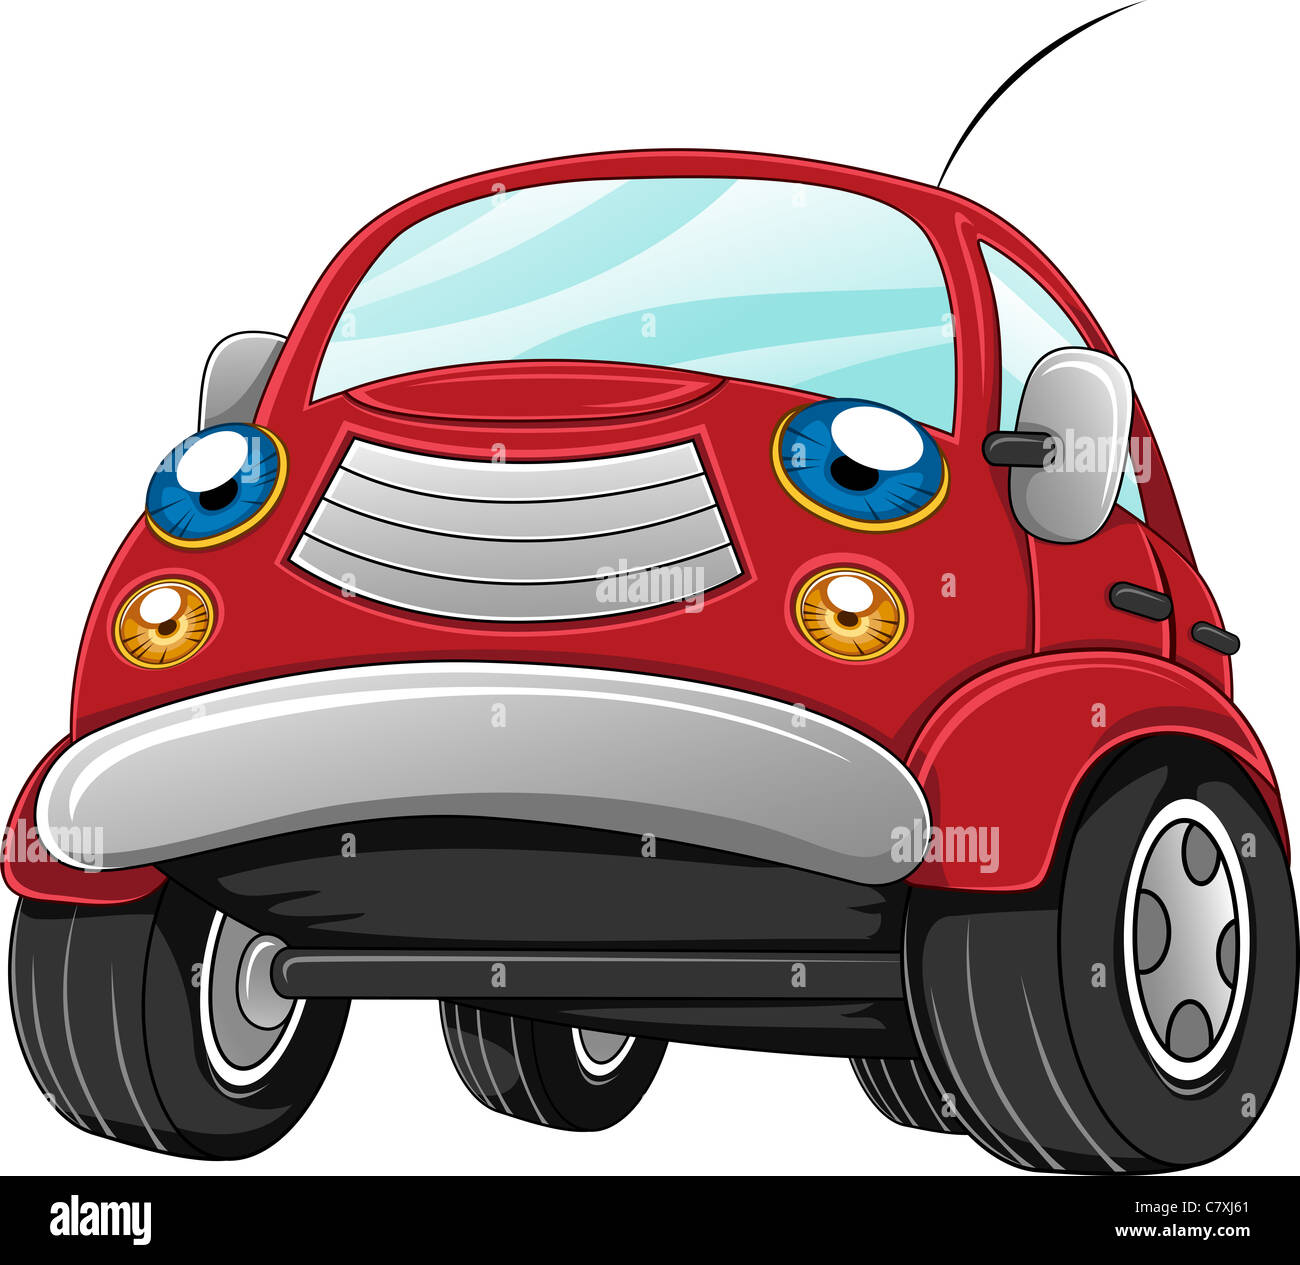 Illustration of a Car Gearing Up Stock Photo